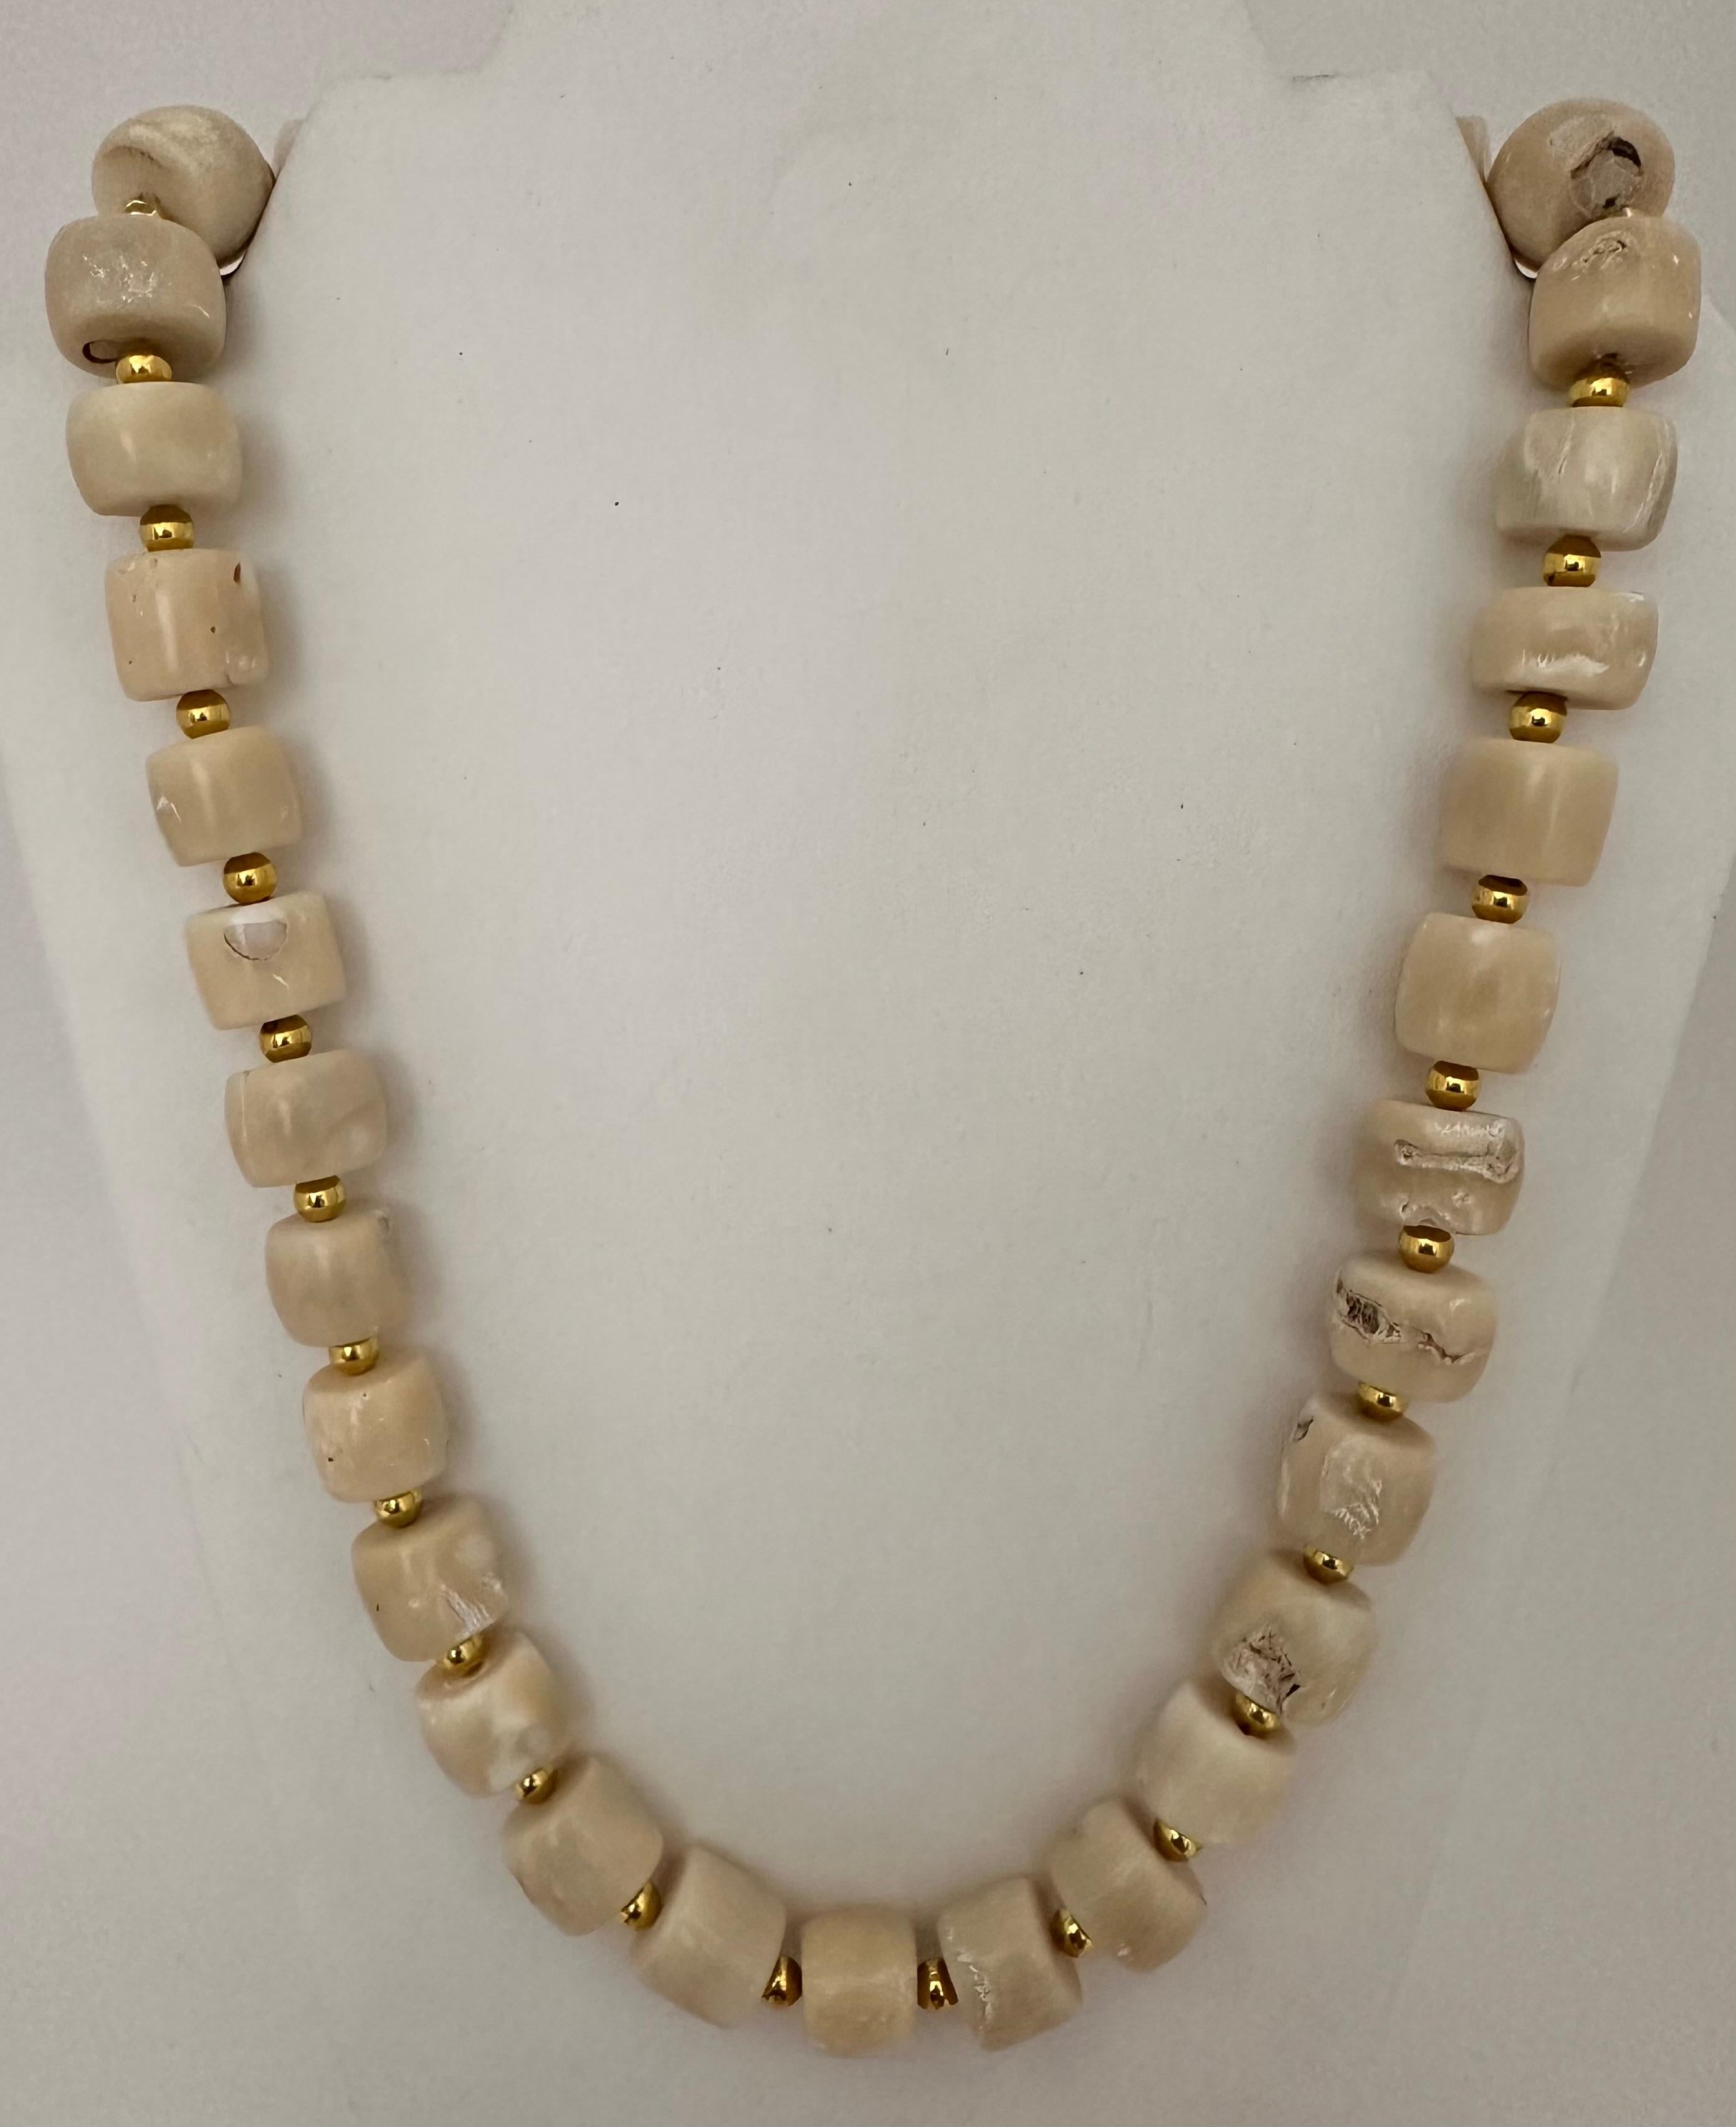 Handmade Gold Plated Beads and approximately 1/2